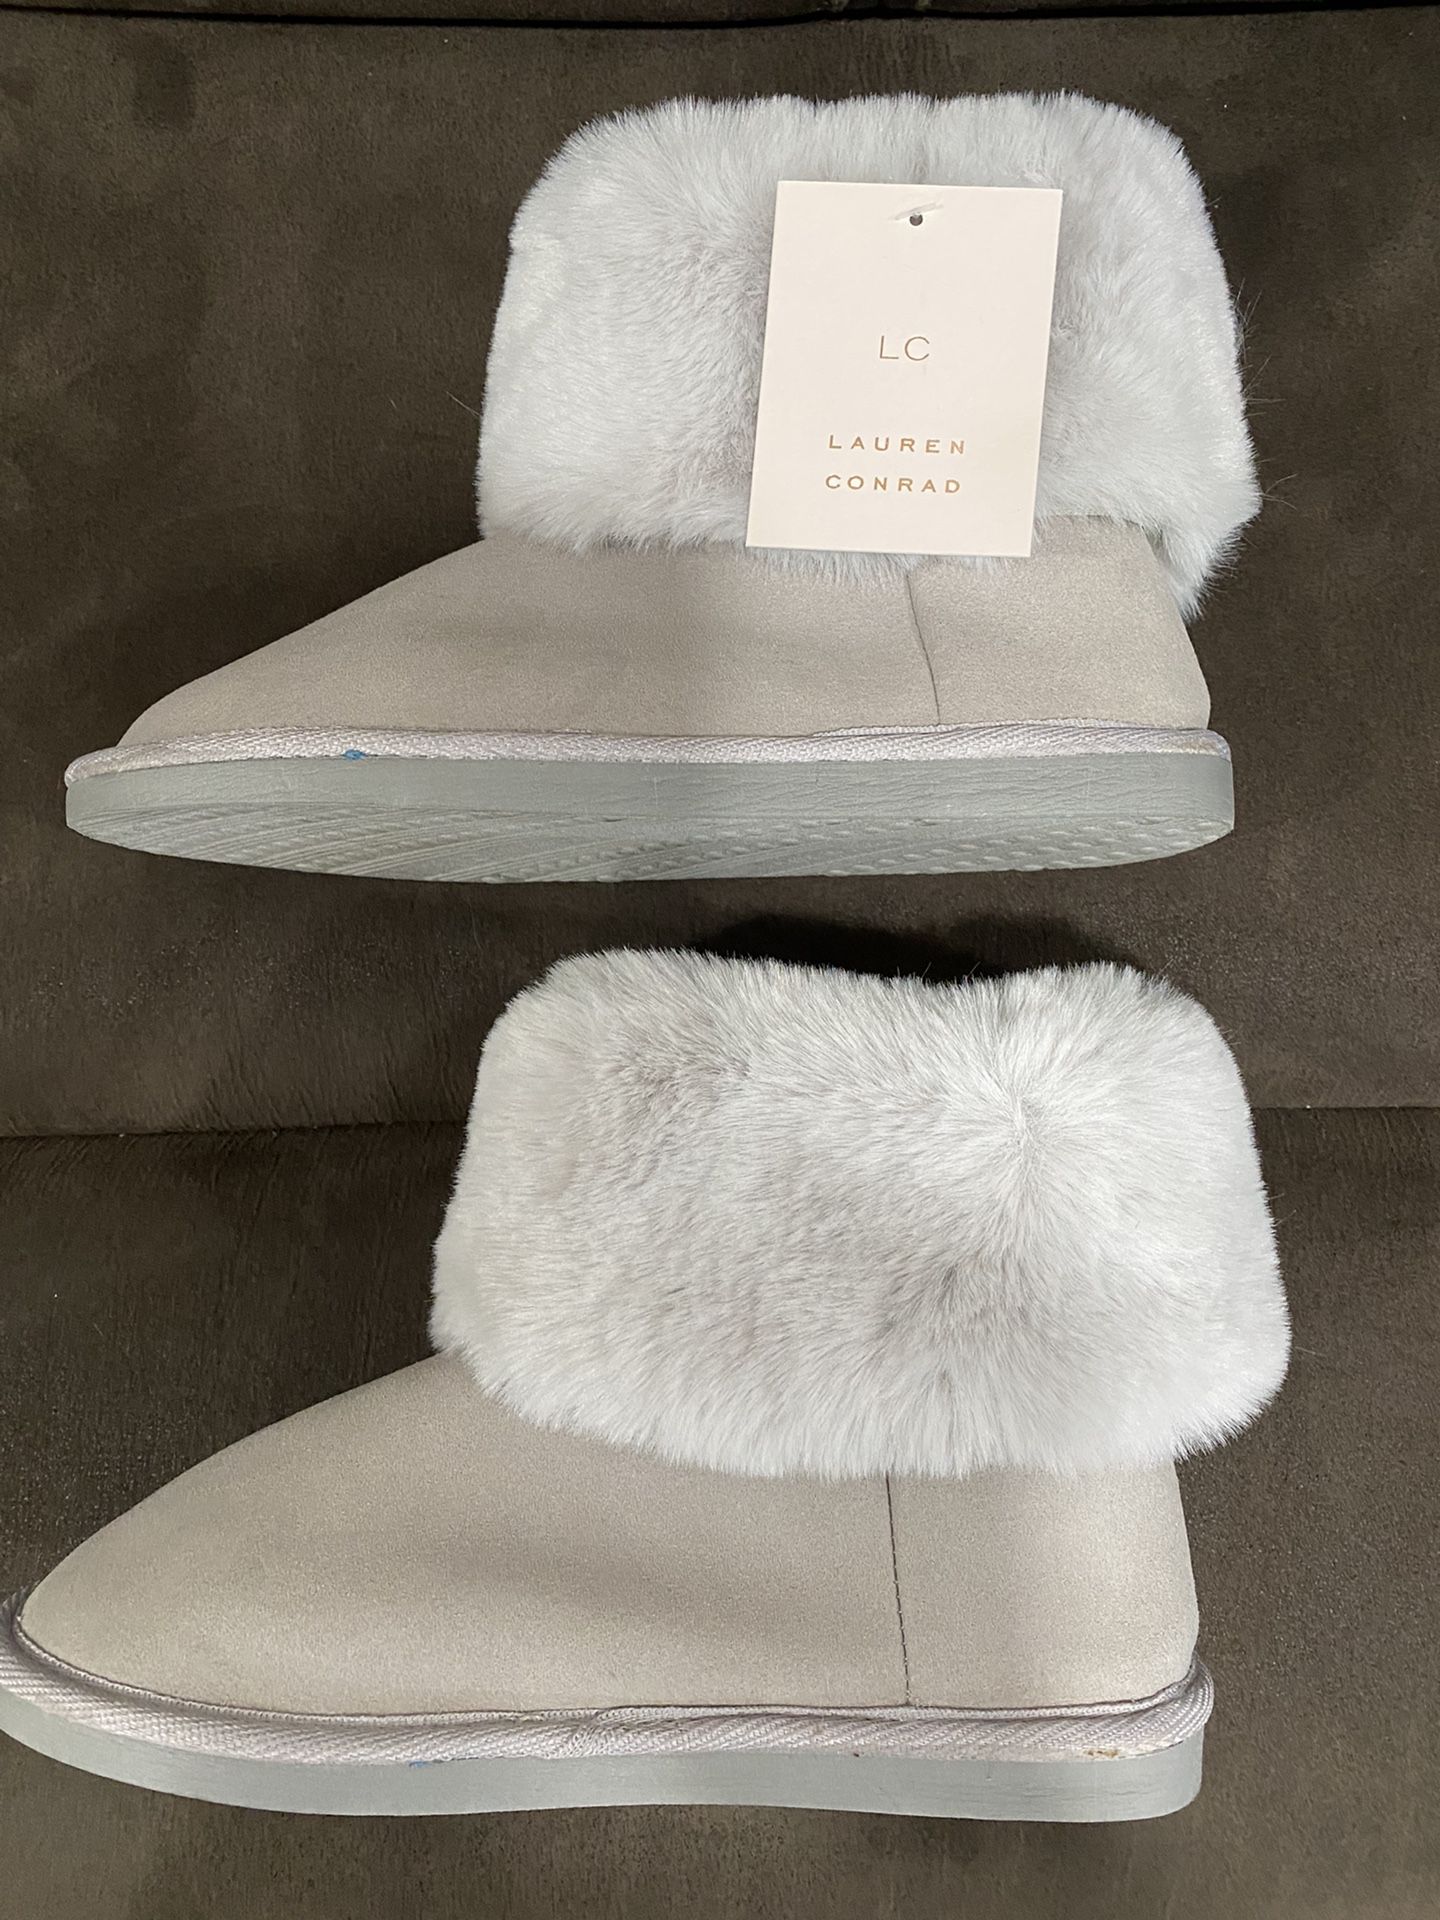 Gray women’s LC Lauren Conrad Faux Fur& Suede Boot Slippers Size 5/6 It’s New Never Used!!